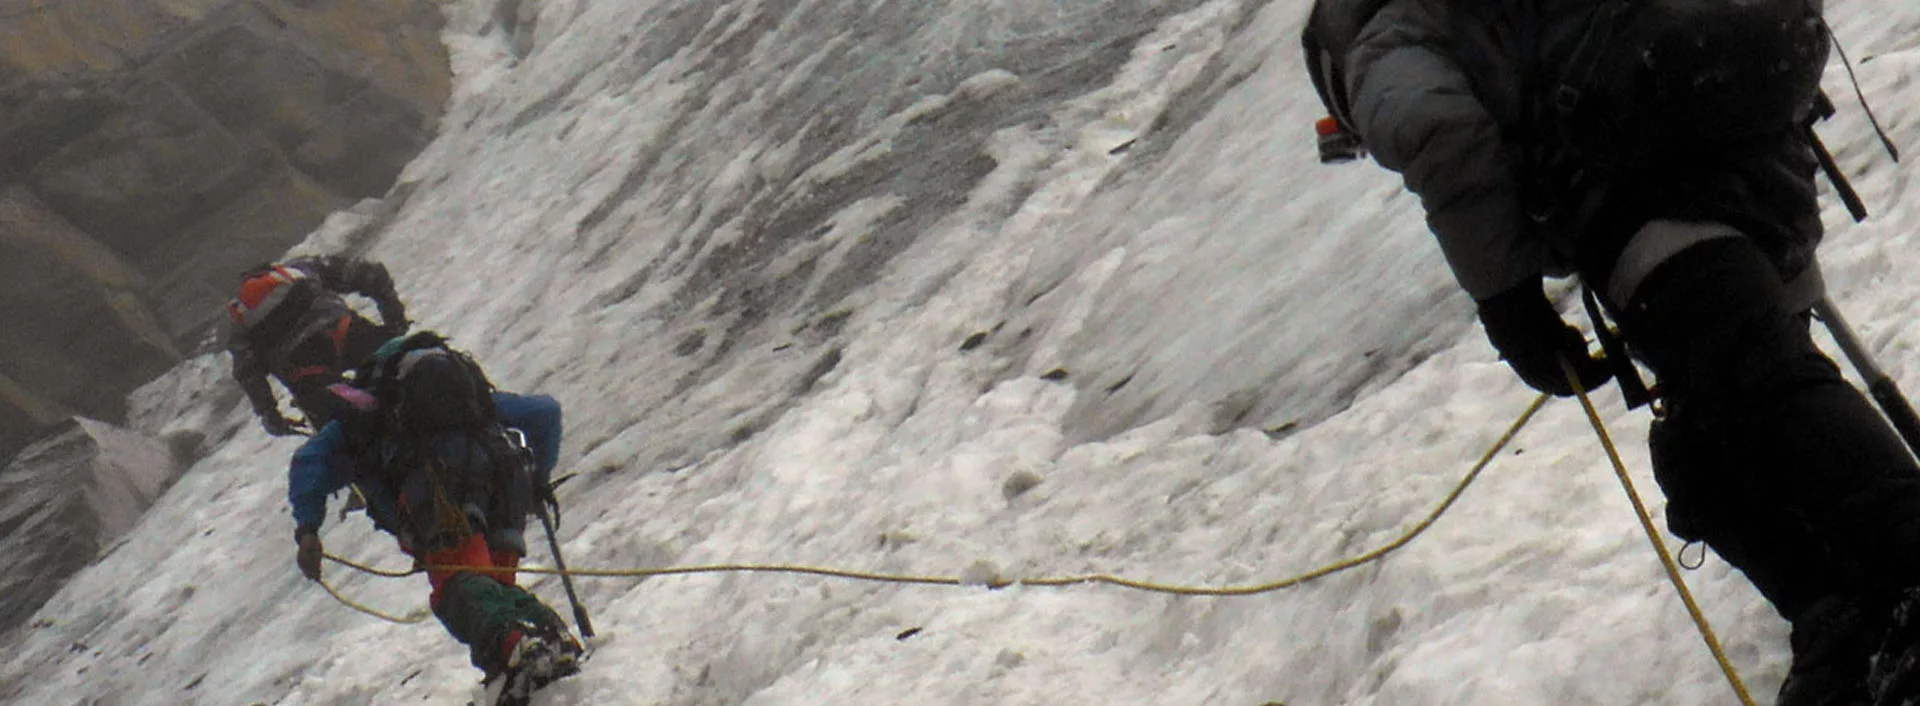 Shitidhar climb trainee using a rope and ice axe in Mt Shitidhar's gully